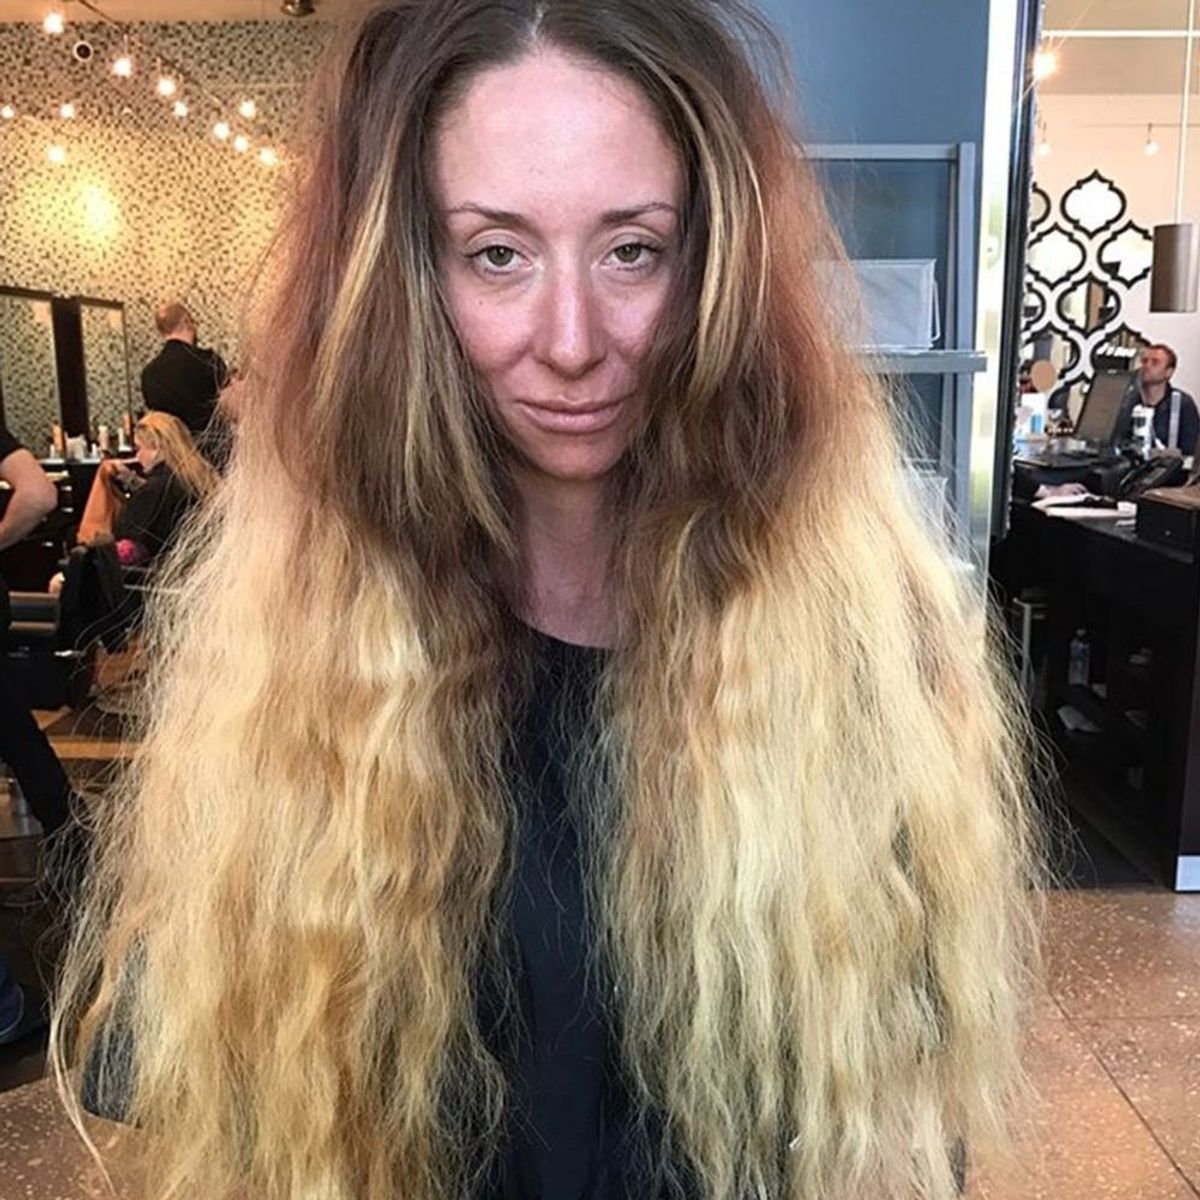 You Won’t Believe This Woman’s Epic Hair Makeover